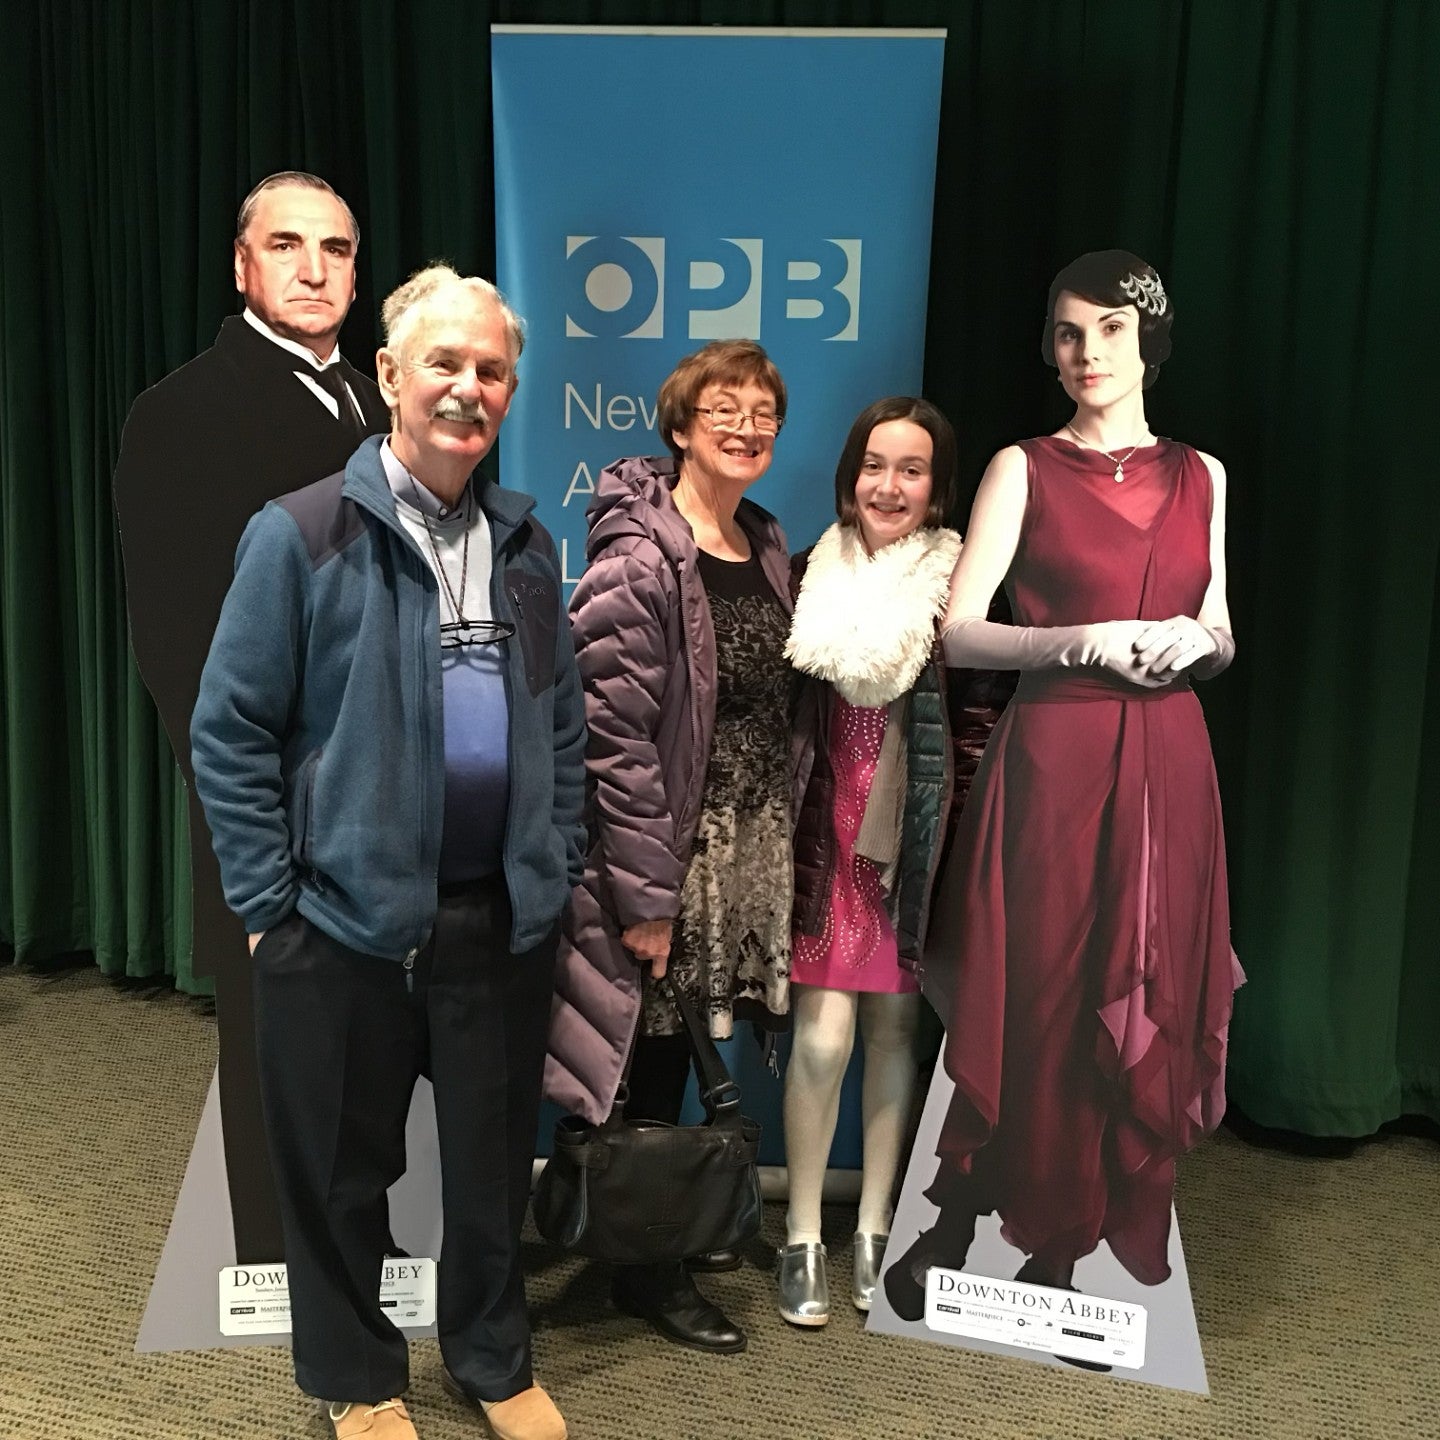 family posing in front of cardboard cutouts of Downton Abbey characters and a sign with OPB logo